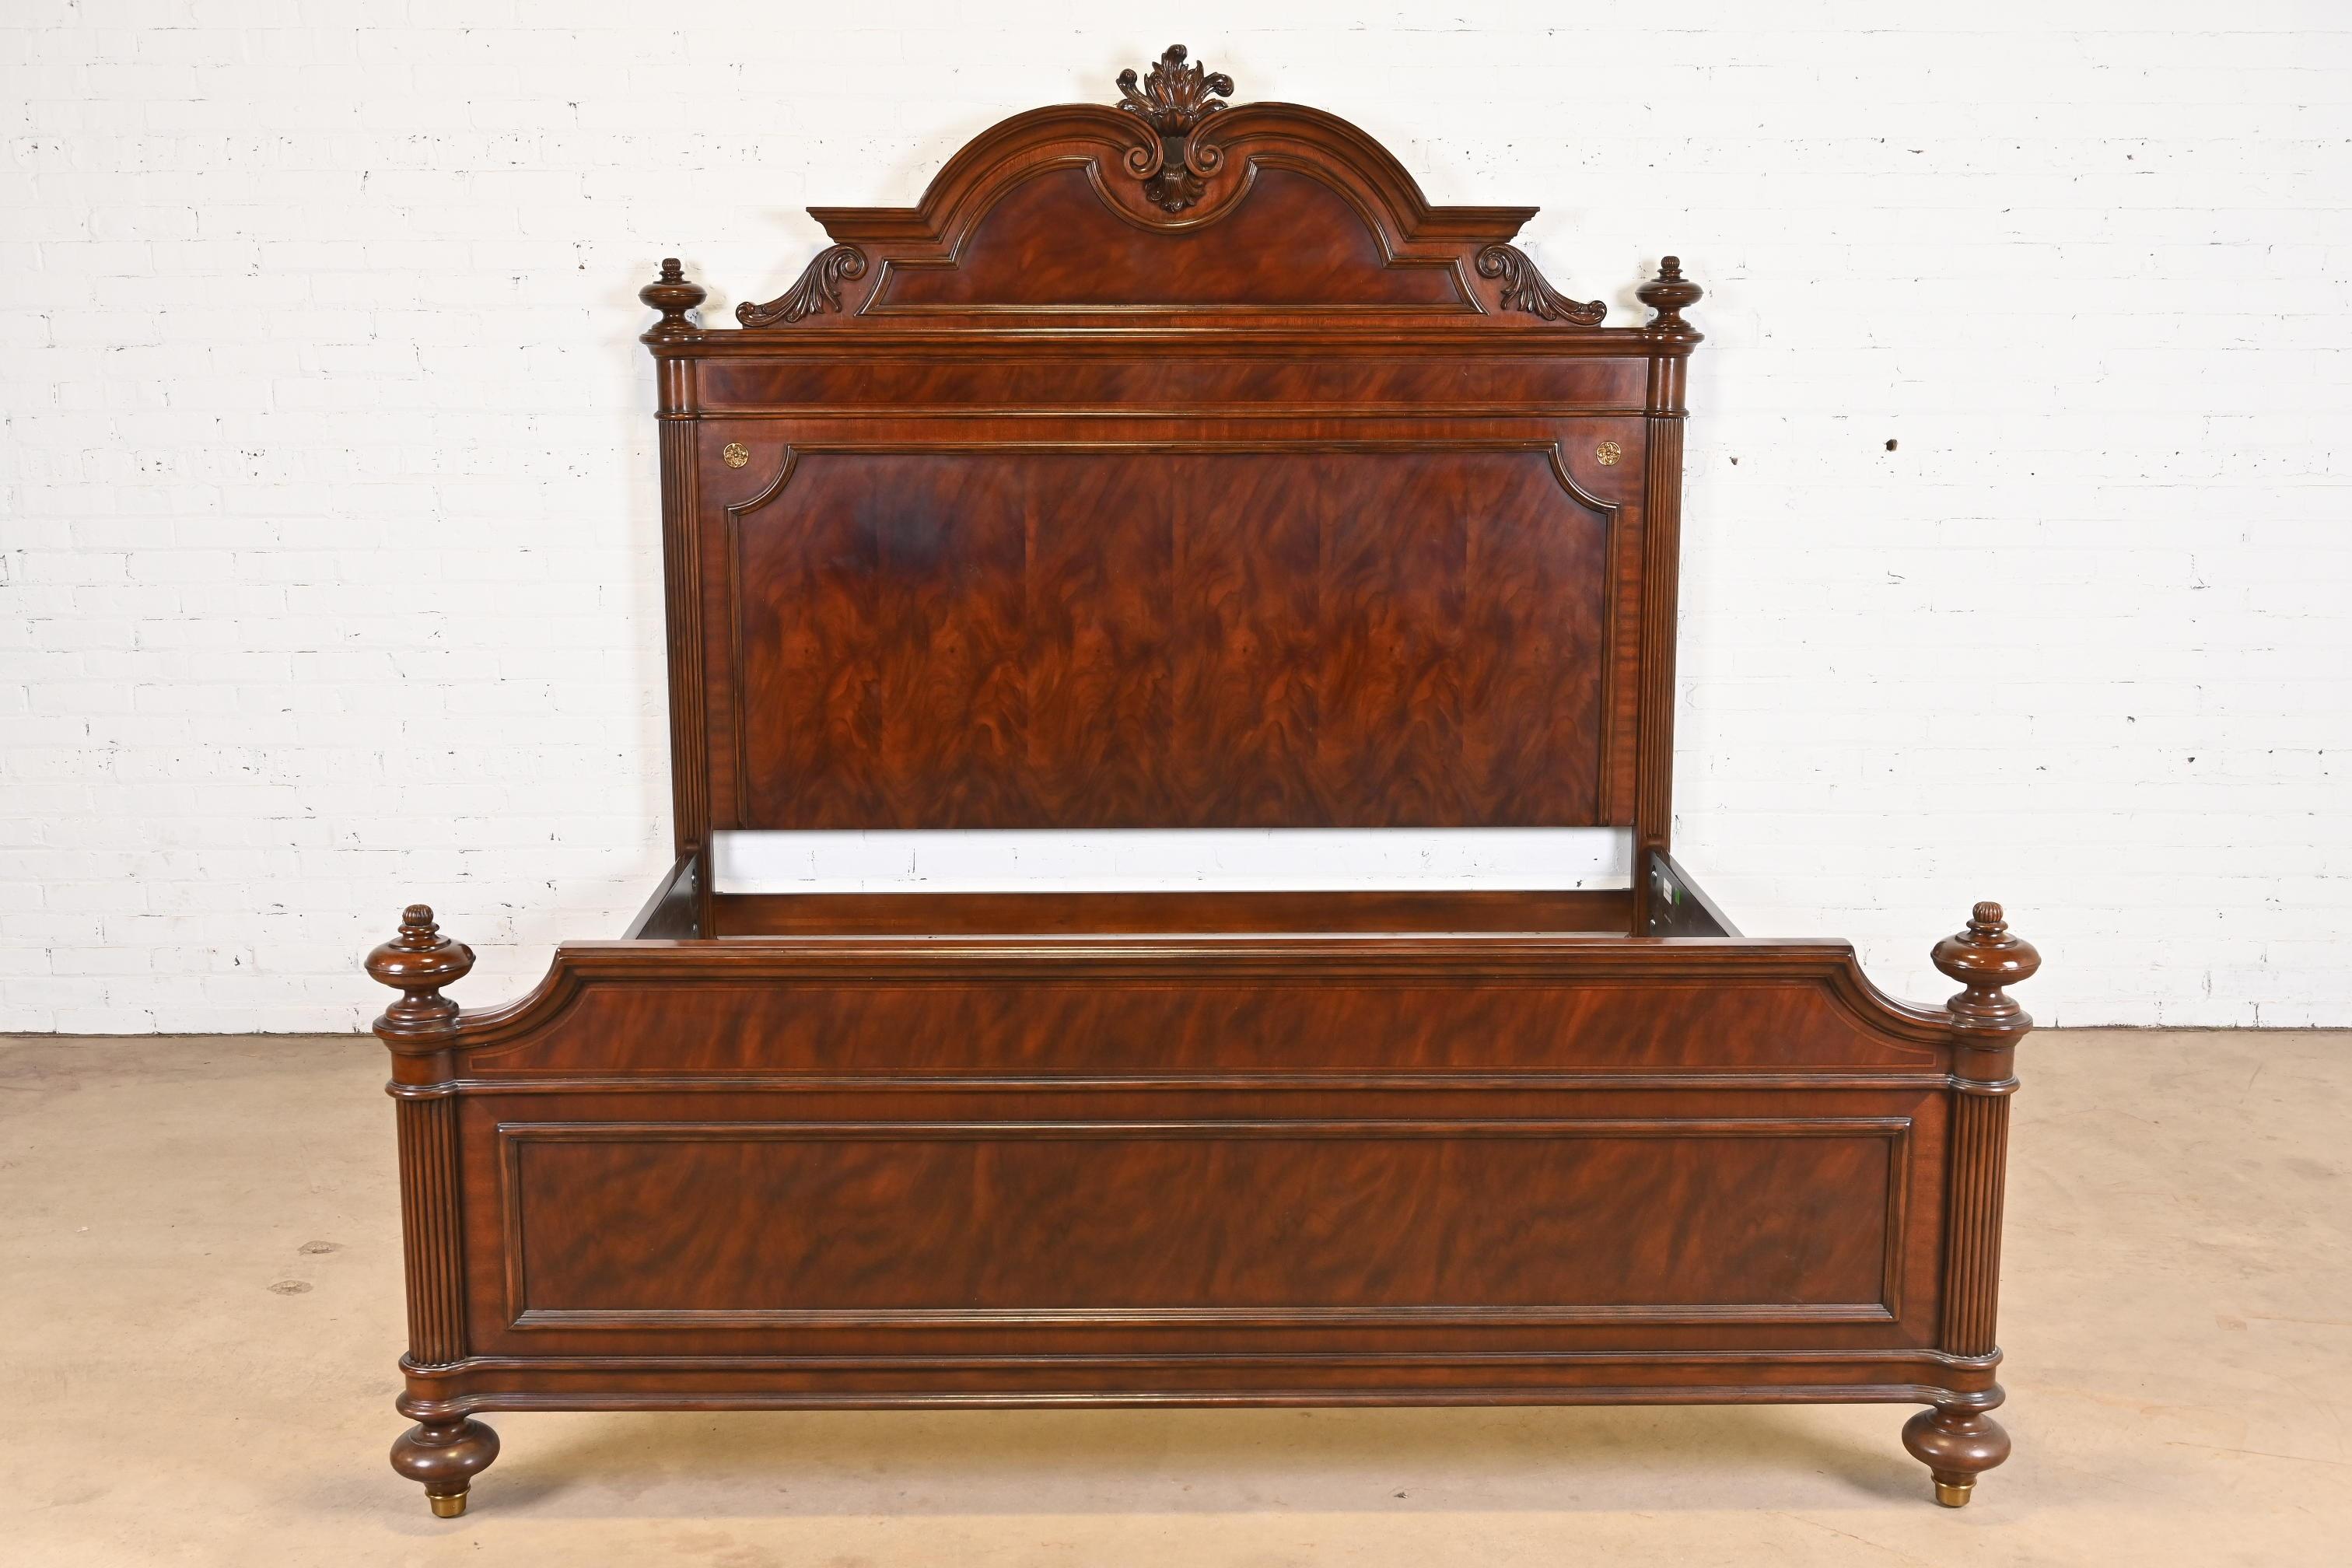 Ralph Lauren Style French Empire Flame Mahogany King Size Bed In Good Condition For Sale In South Bend, IN